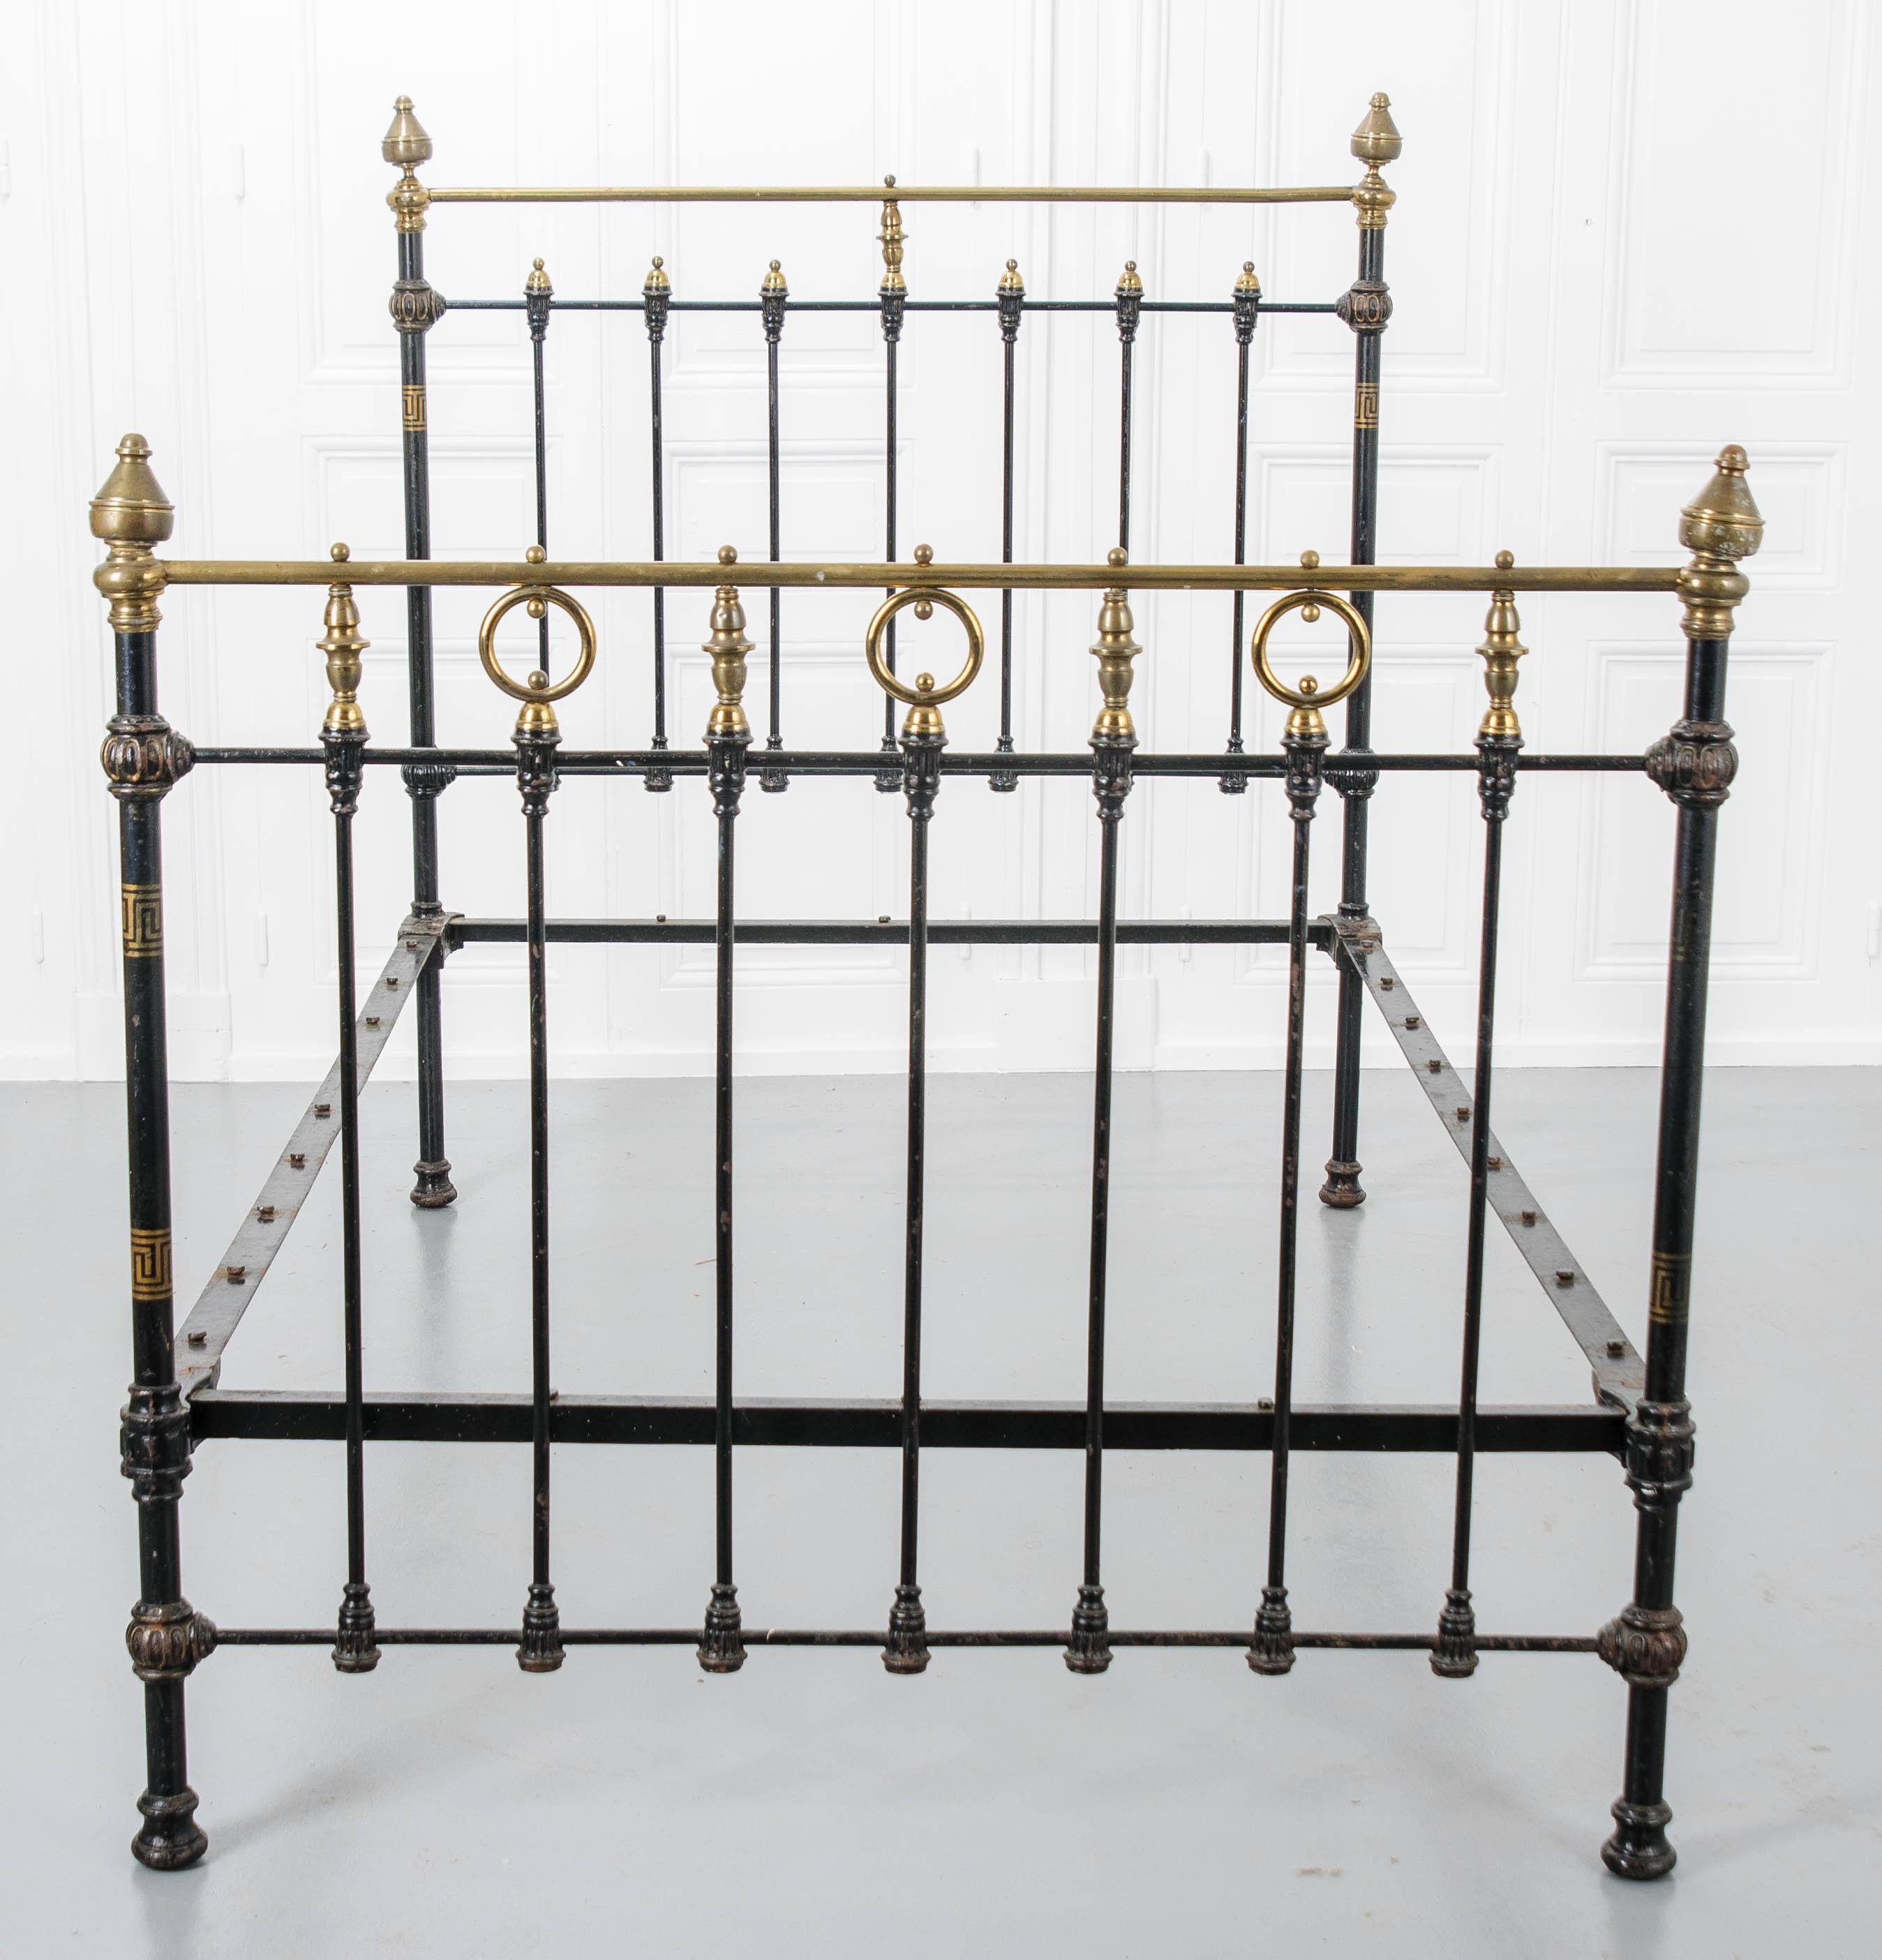 Brass finials adorn the four posts of this vintage French iron and brass full size bed. The cast iron frame has been painted black, which pairs with the metallic brass to create a smart and refined style. The frame features gold painted details,